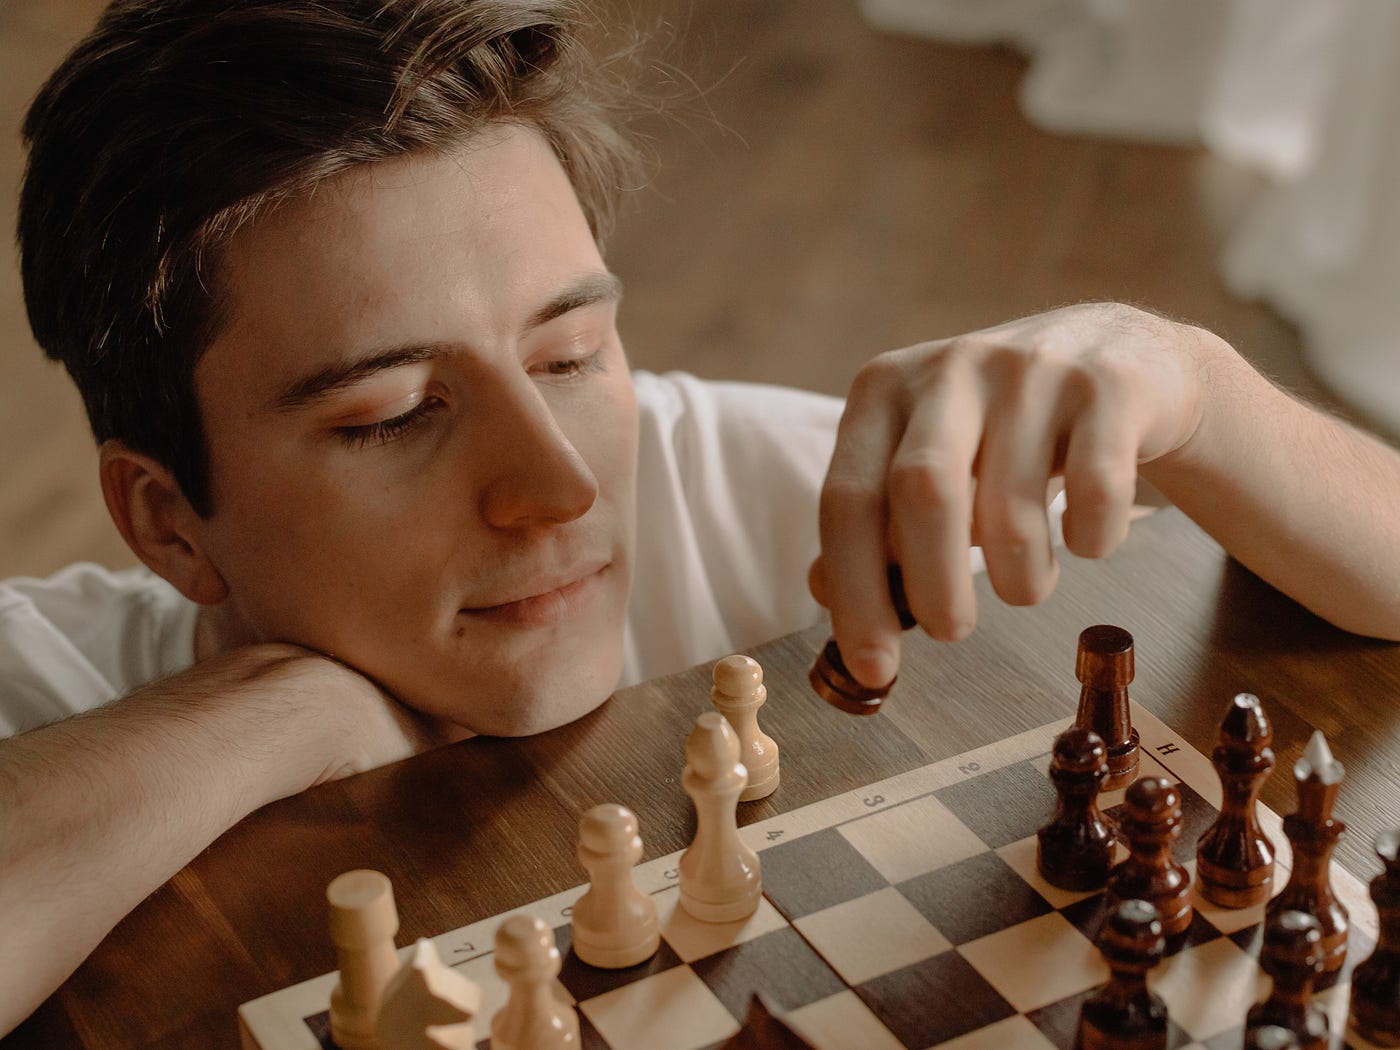 How the Game of Chess is Another Metaphor for Life